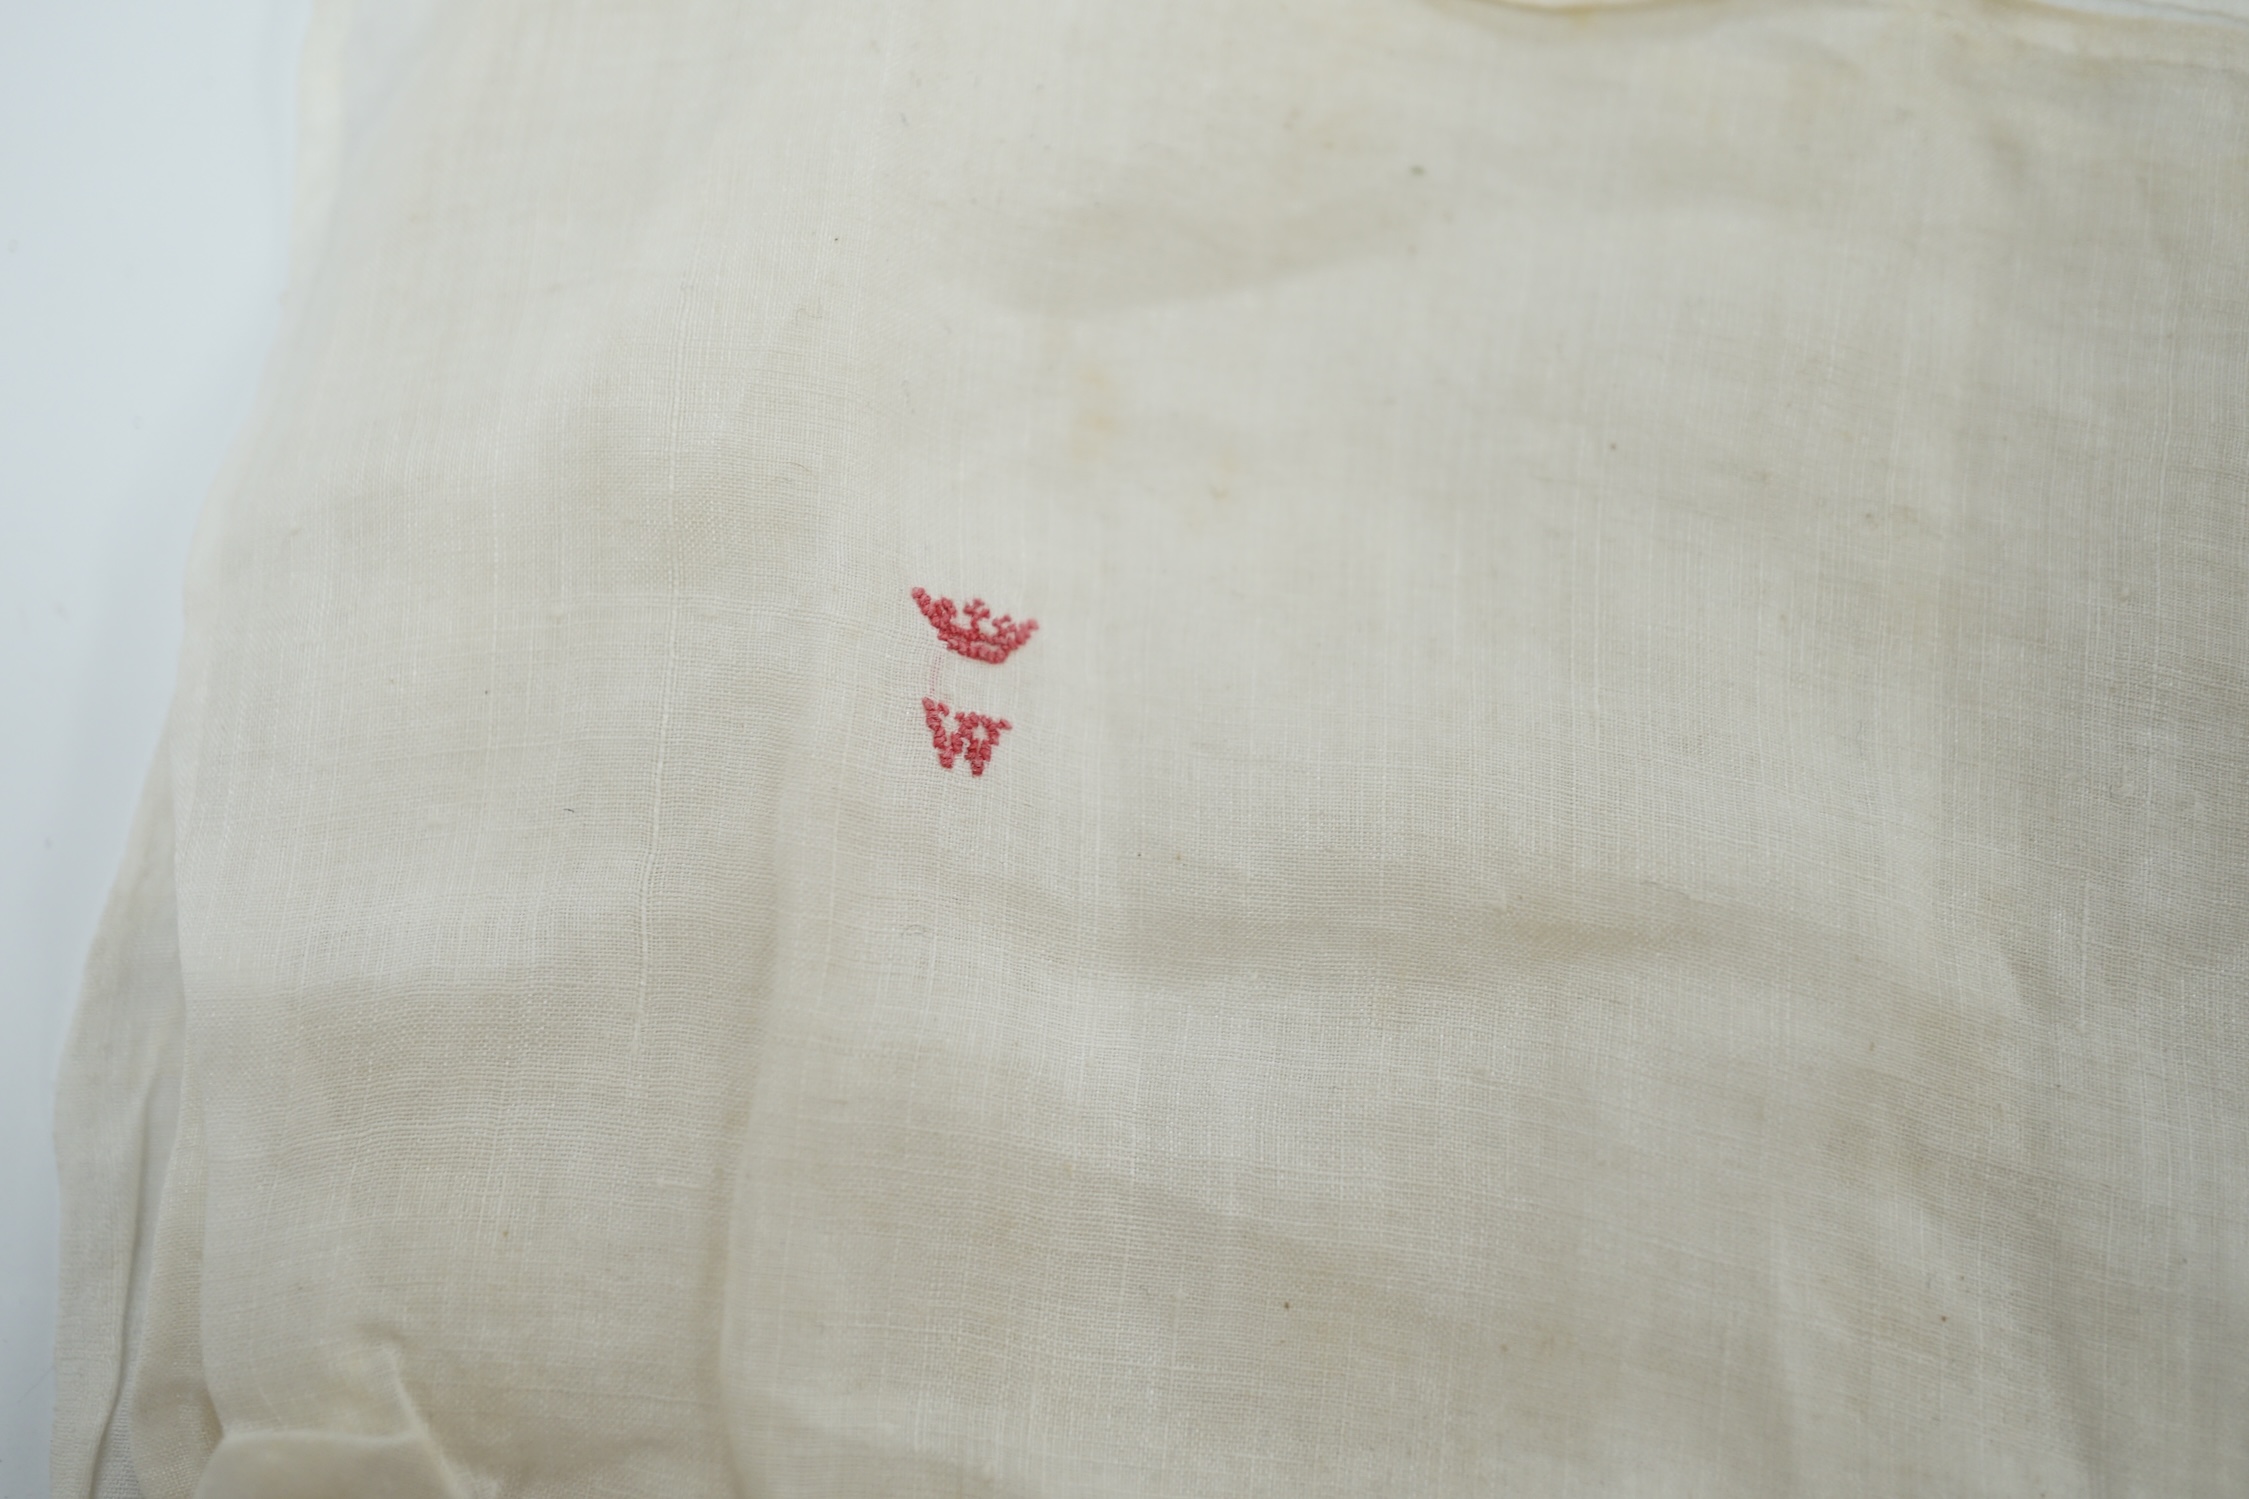 Two handkerchiefs each bearing an embroidered ‘W’ below a coronet, understood to be for the Duke of Wellington, 36 x 34cm. Condition - fair, some staining and foxing